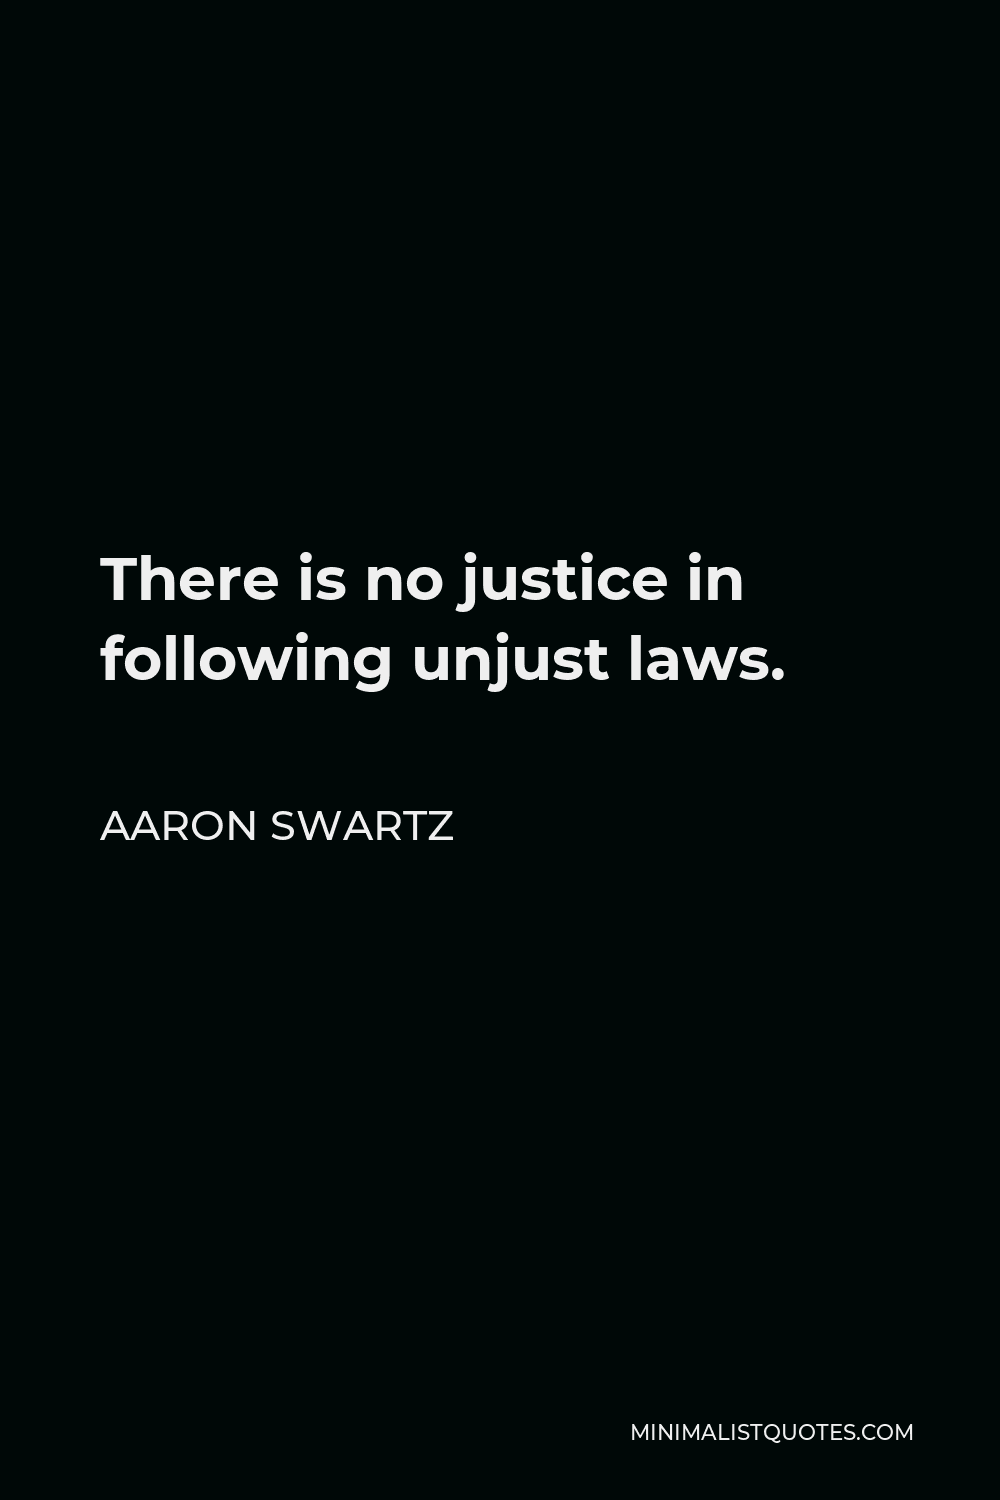 Aaron Swartz Quote - There is no justice in following unjust laws.